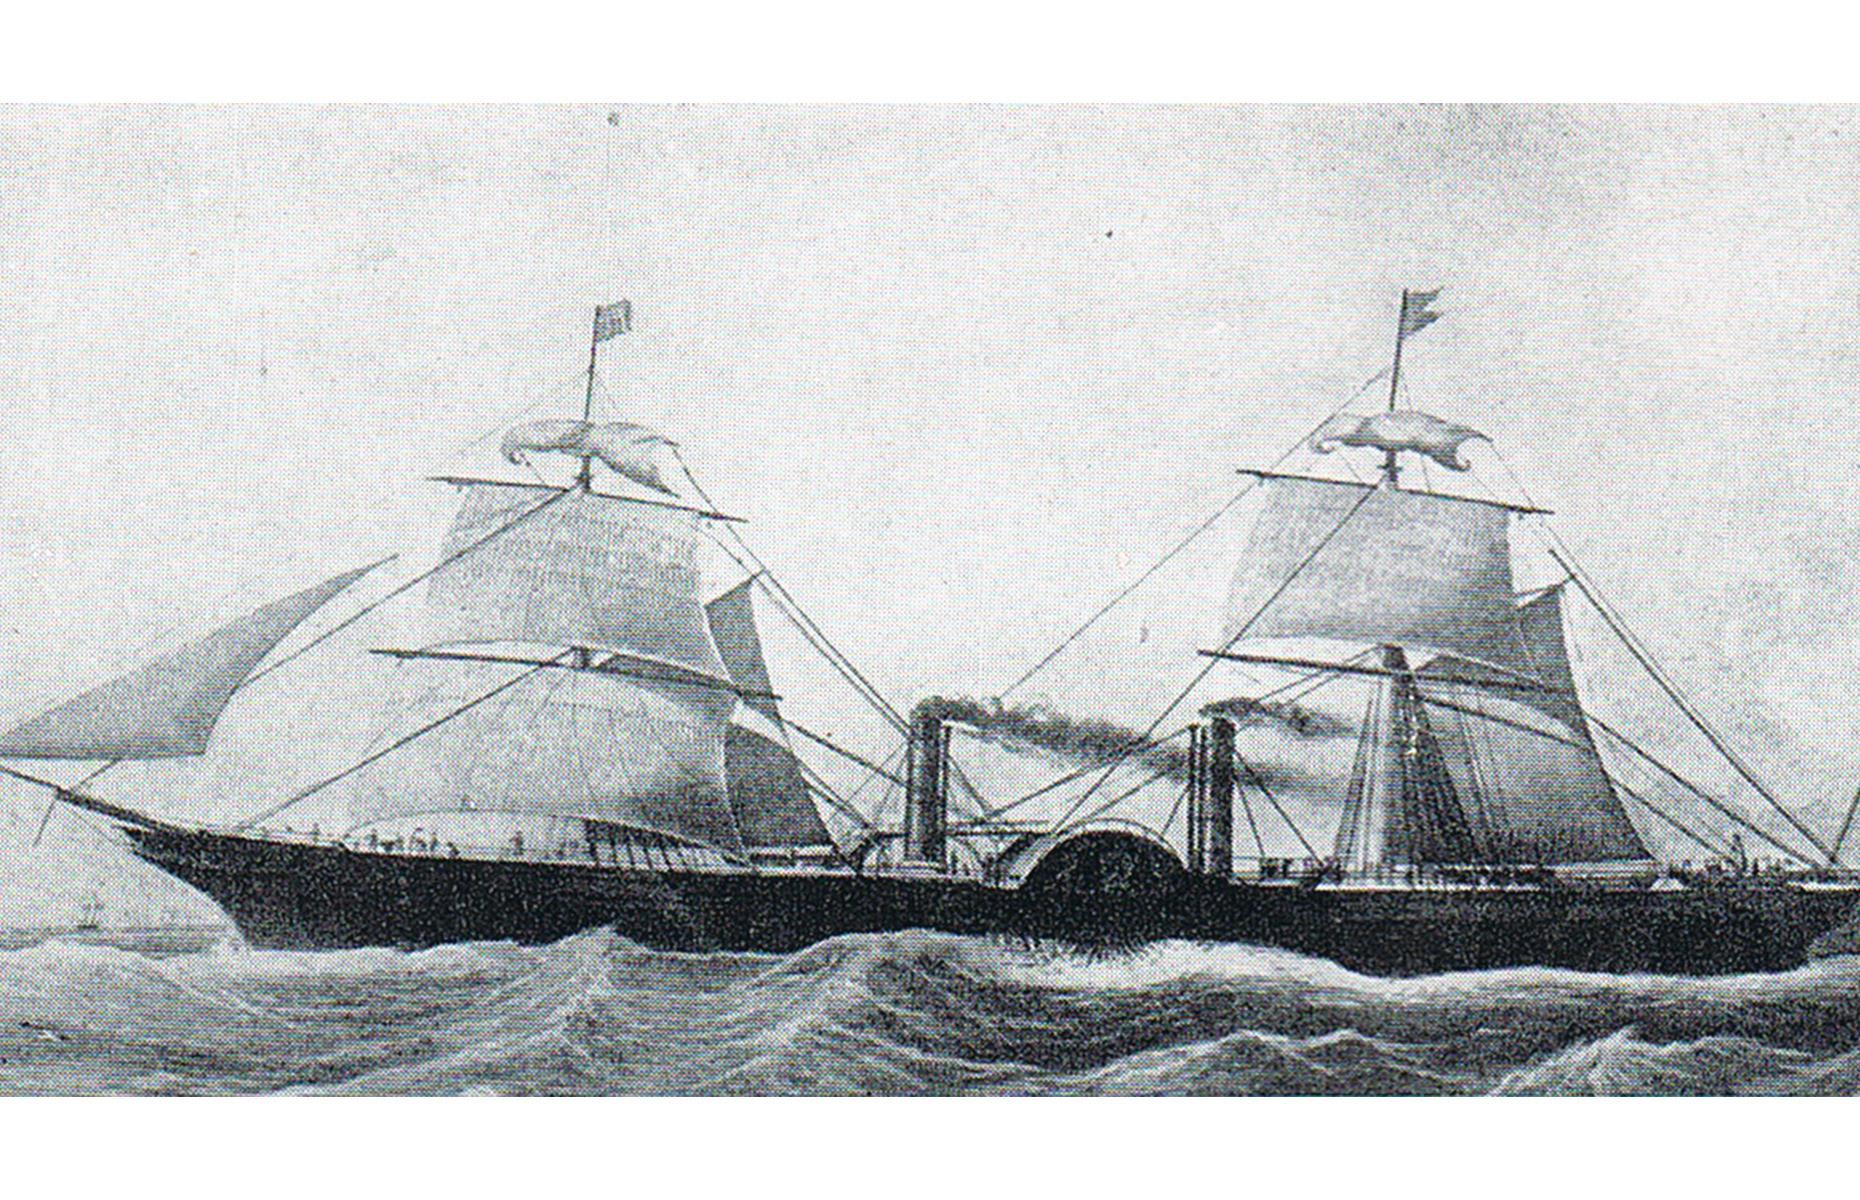 <p>Passenger cruising continued to develop through the mid-19th century, with luxuries like on-board lounges and simple entertainment emerging. Shown here, in 1856, is Cunard's RMS Persia, one of the largest ships of her time and an early Blue Riband winner (an award given for high-speed Atlantic crossings).</p>  <p><strong><a href="http://bit.ly/3roL4wv">Love this? Follow our Facebook page for more travel inspiration</a></strong></p>